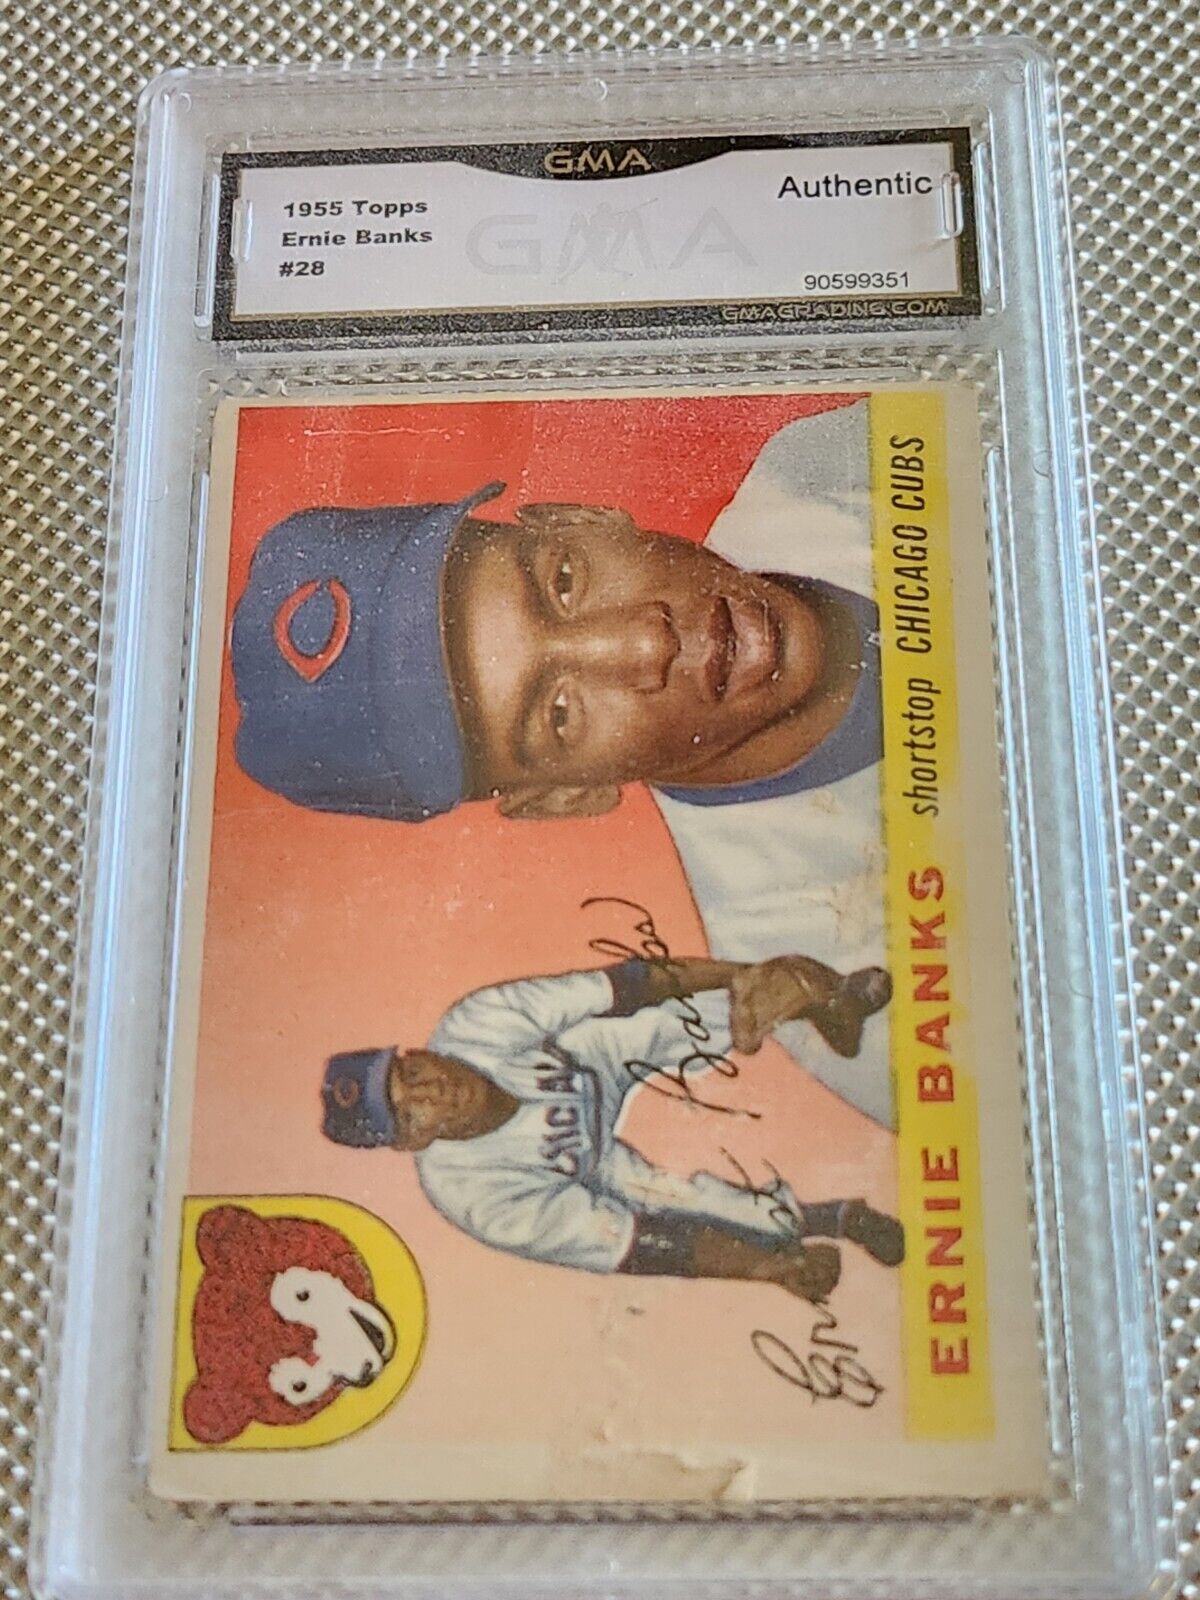 1955 Topps ERNIE BANKS Cubs #28 2nd YEAR CARD GMA AUTHENTIC